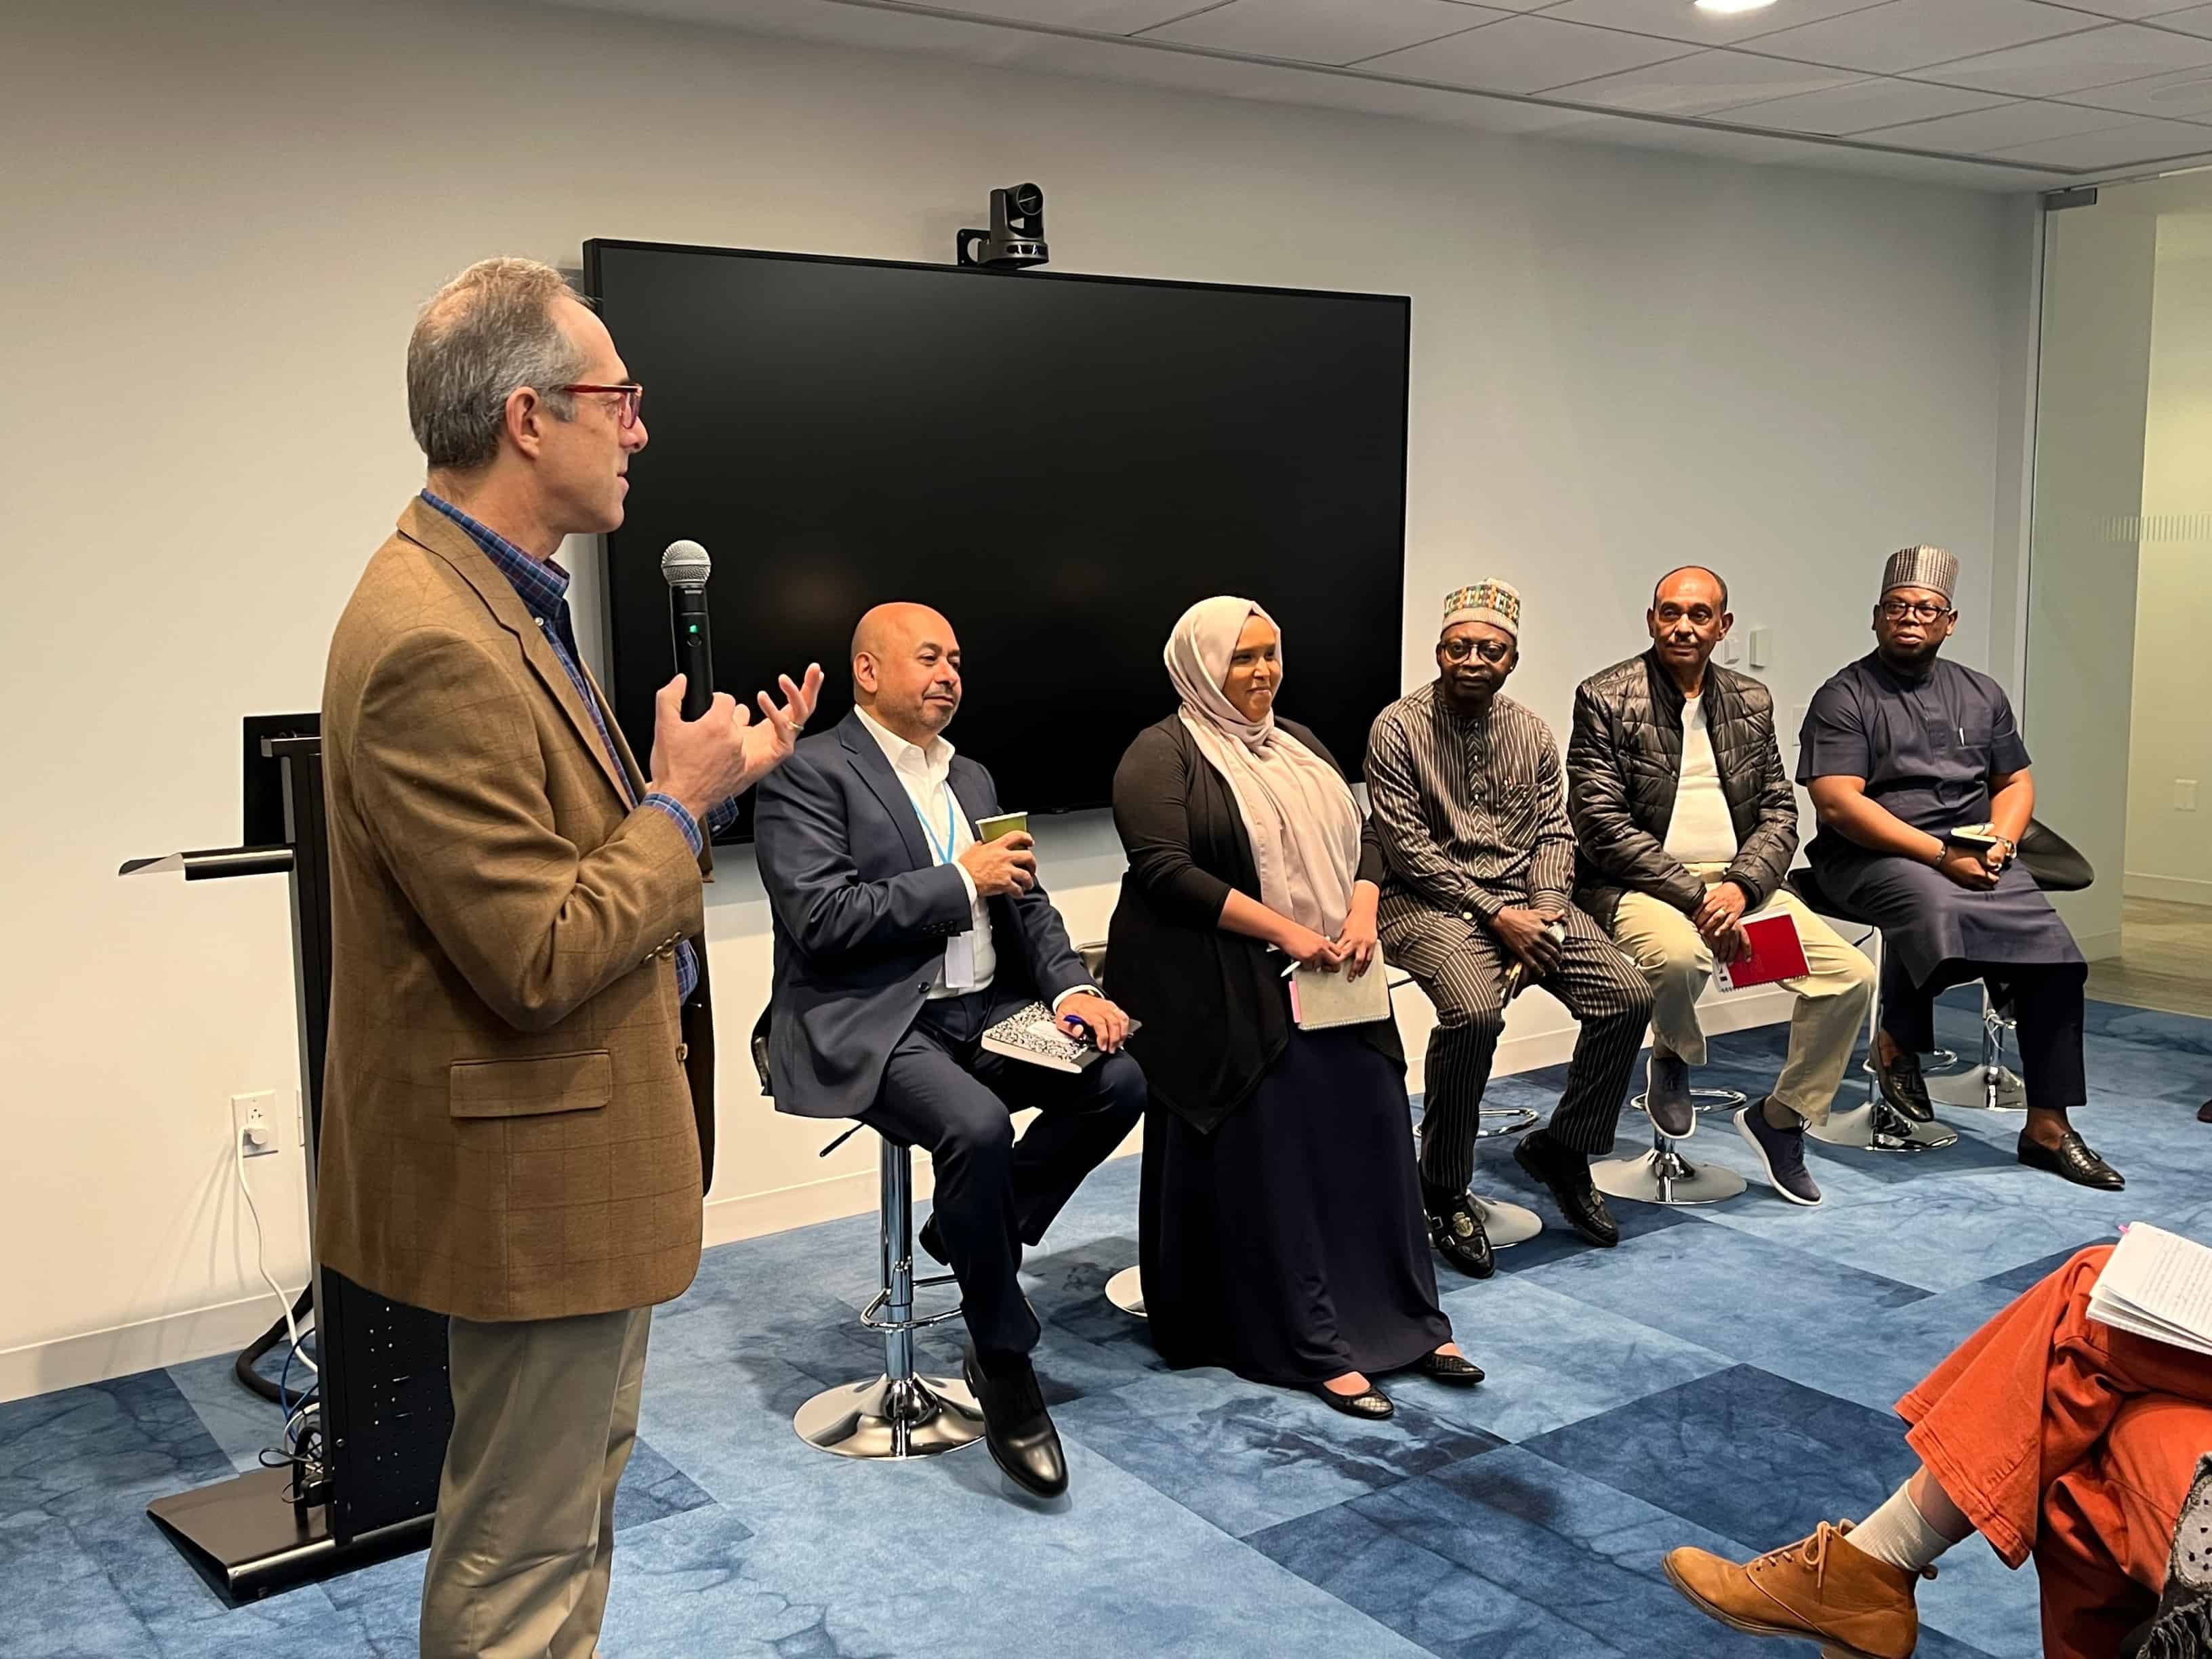 Cory Heyman, VP of Creative's Education Division, introduces leaders from projects in Africa and the Middle East as they share their insights on strengthening education systems.